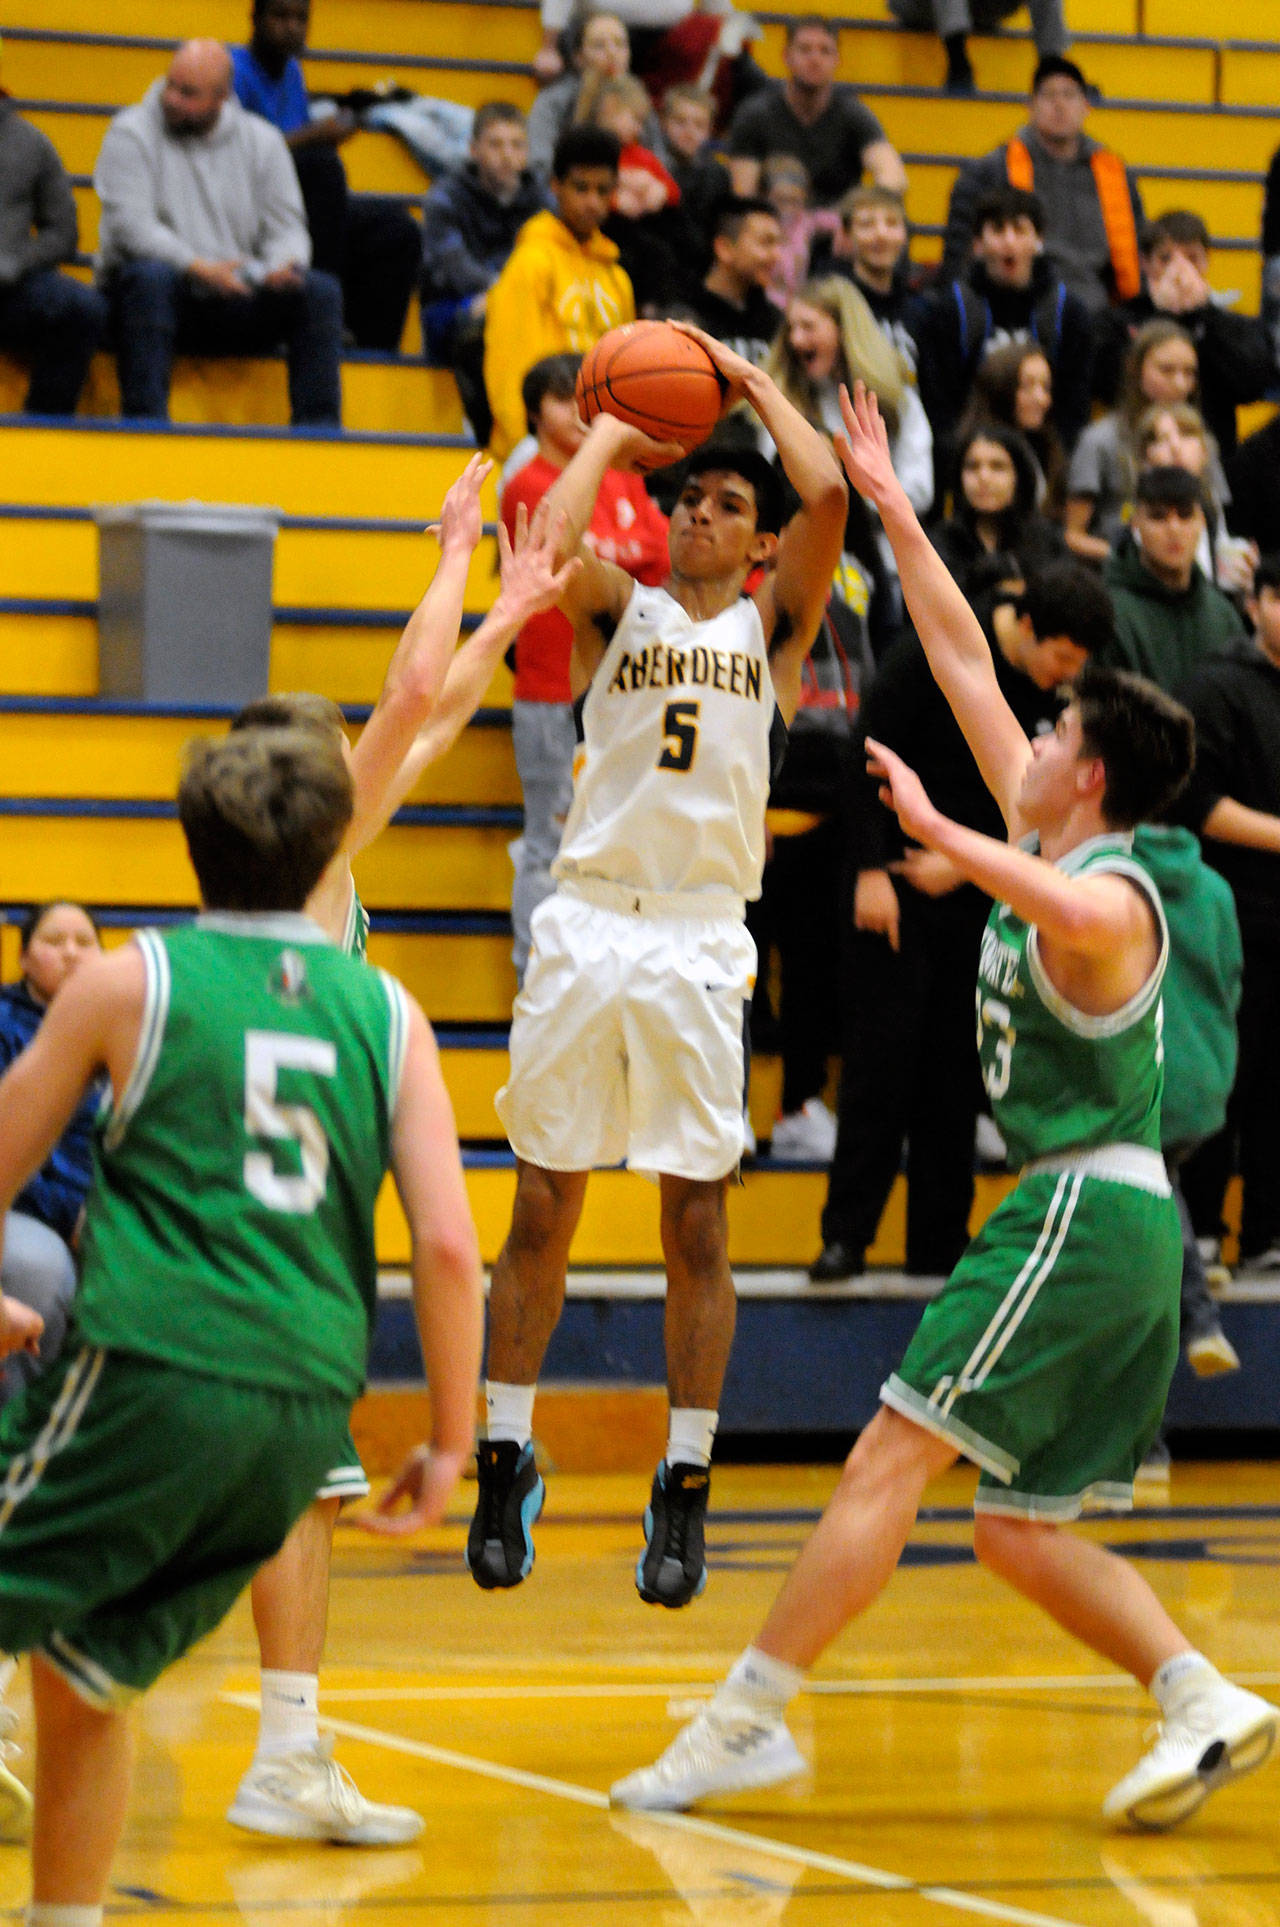 Aberdeen guard Javier Bojorge shoots during the first half against Tumwater on Tuesday. Bojorge finished with a game-best 21 points. (Ryan Sparks | Grays Harbor News Group)